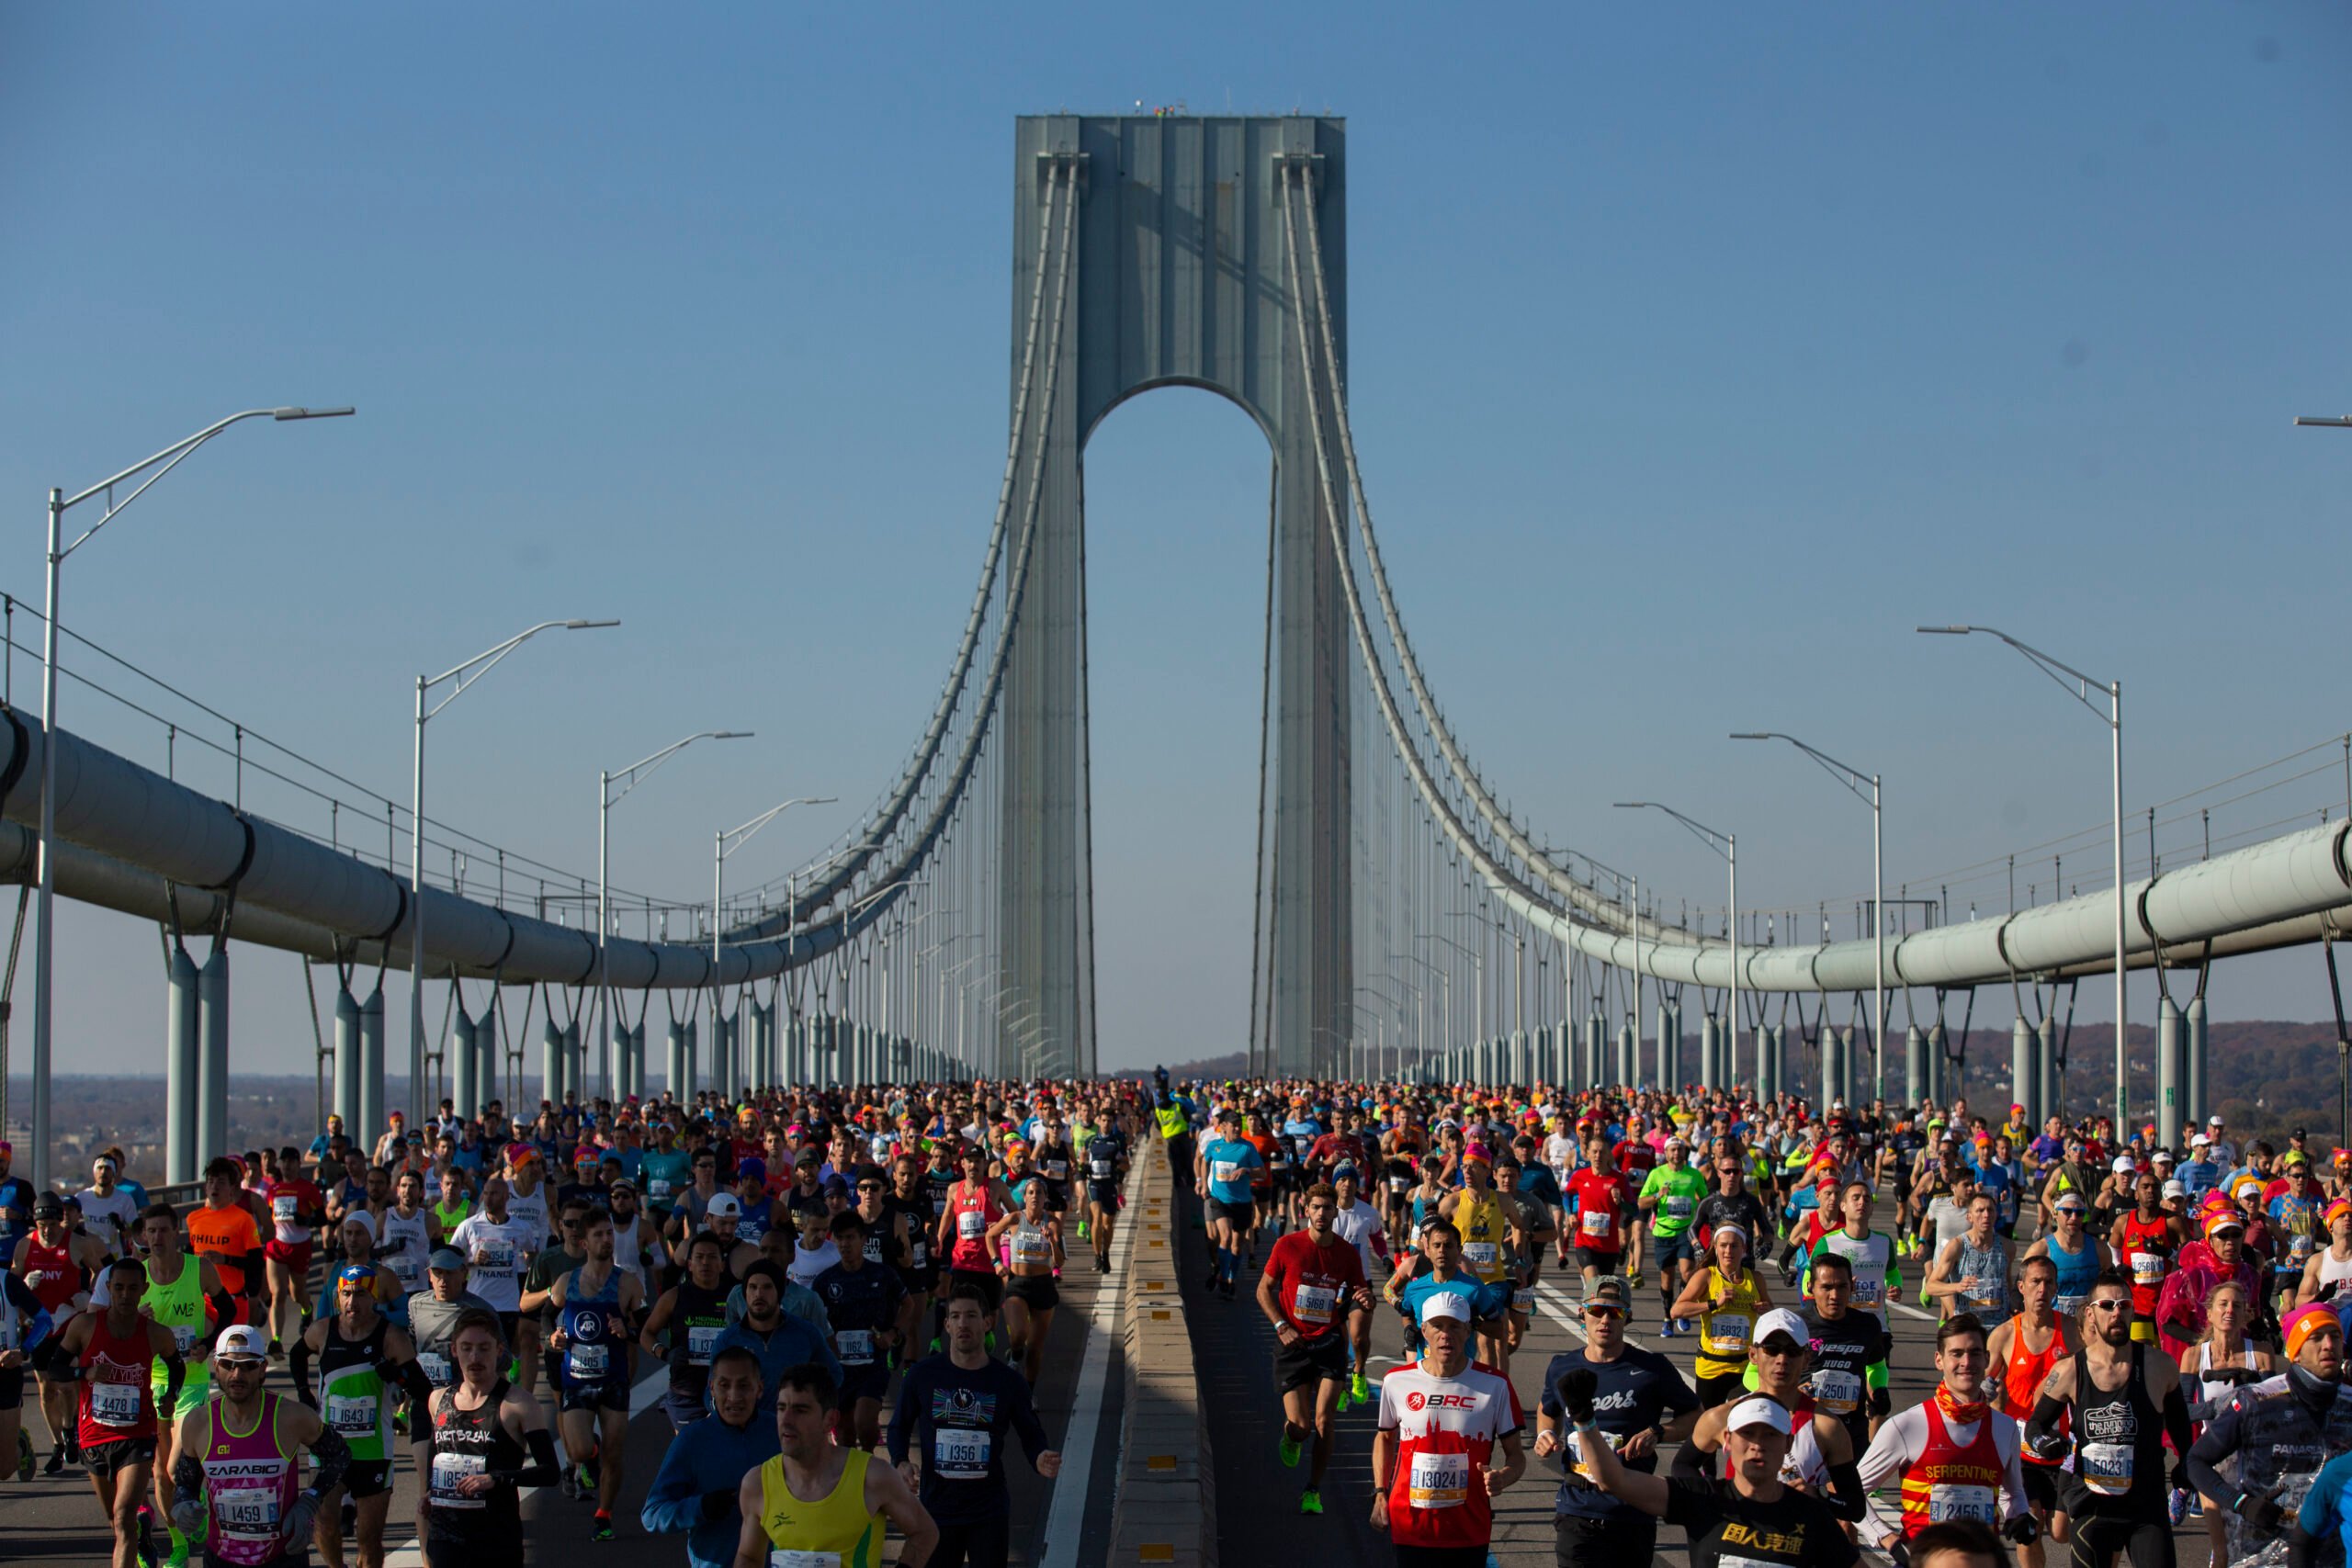 Ben Norman's photo from the end of the Verrazano Bridge shows it crowded with marathon runners